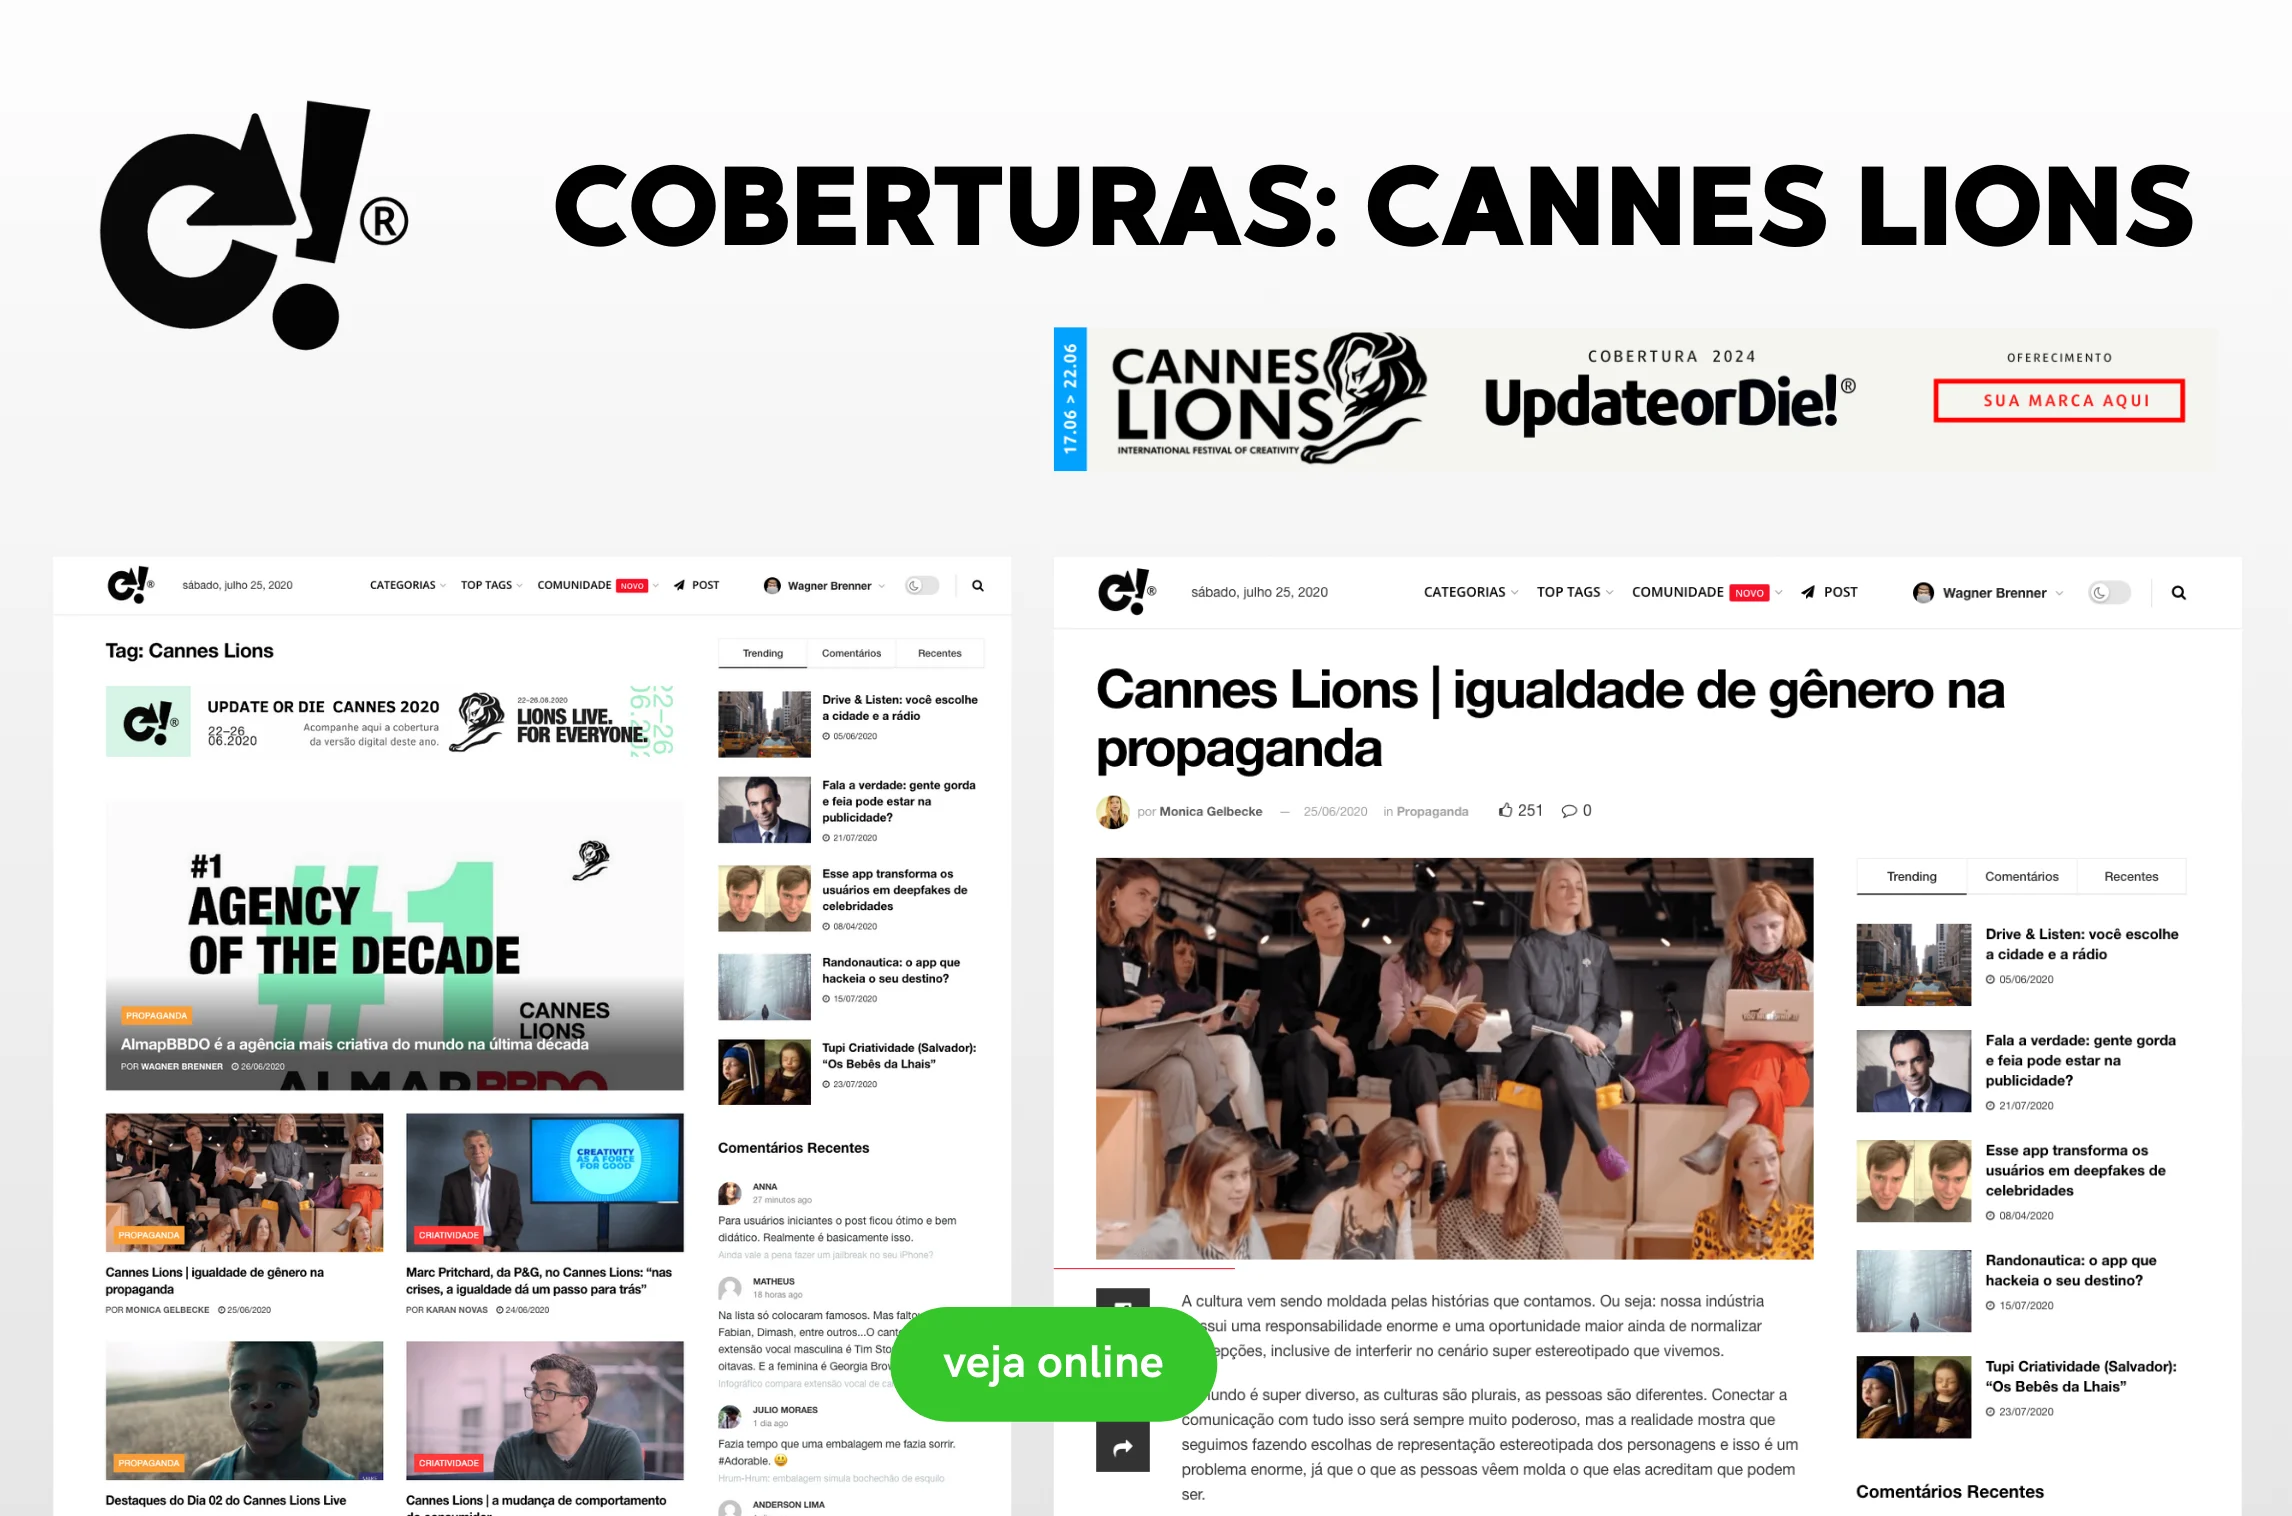 Screenshot of a news website covering Cannes Lions with headlines discussing gender equality in advertising and agency of the decade.